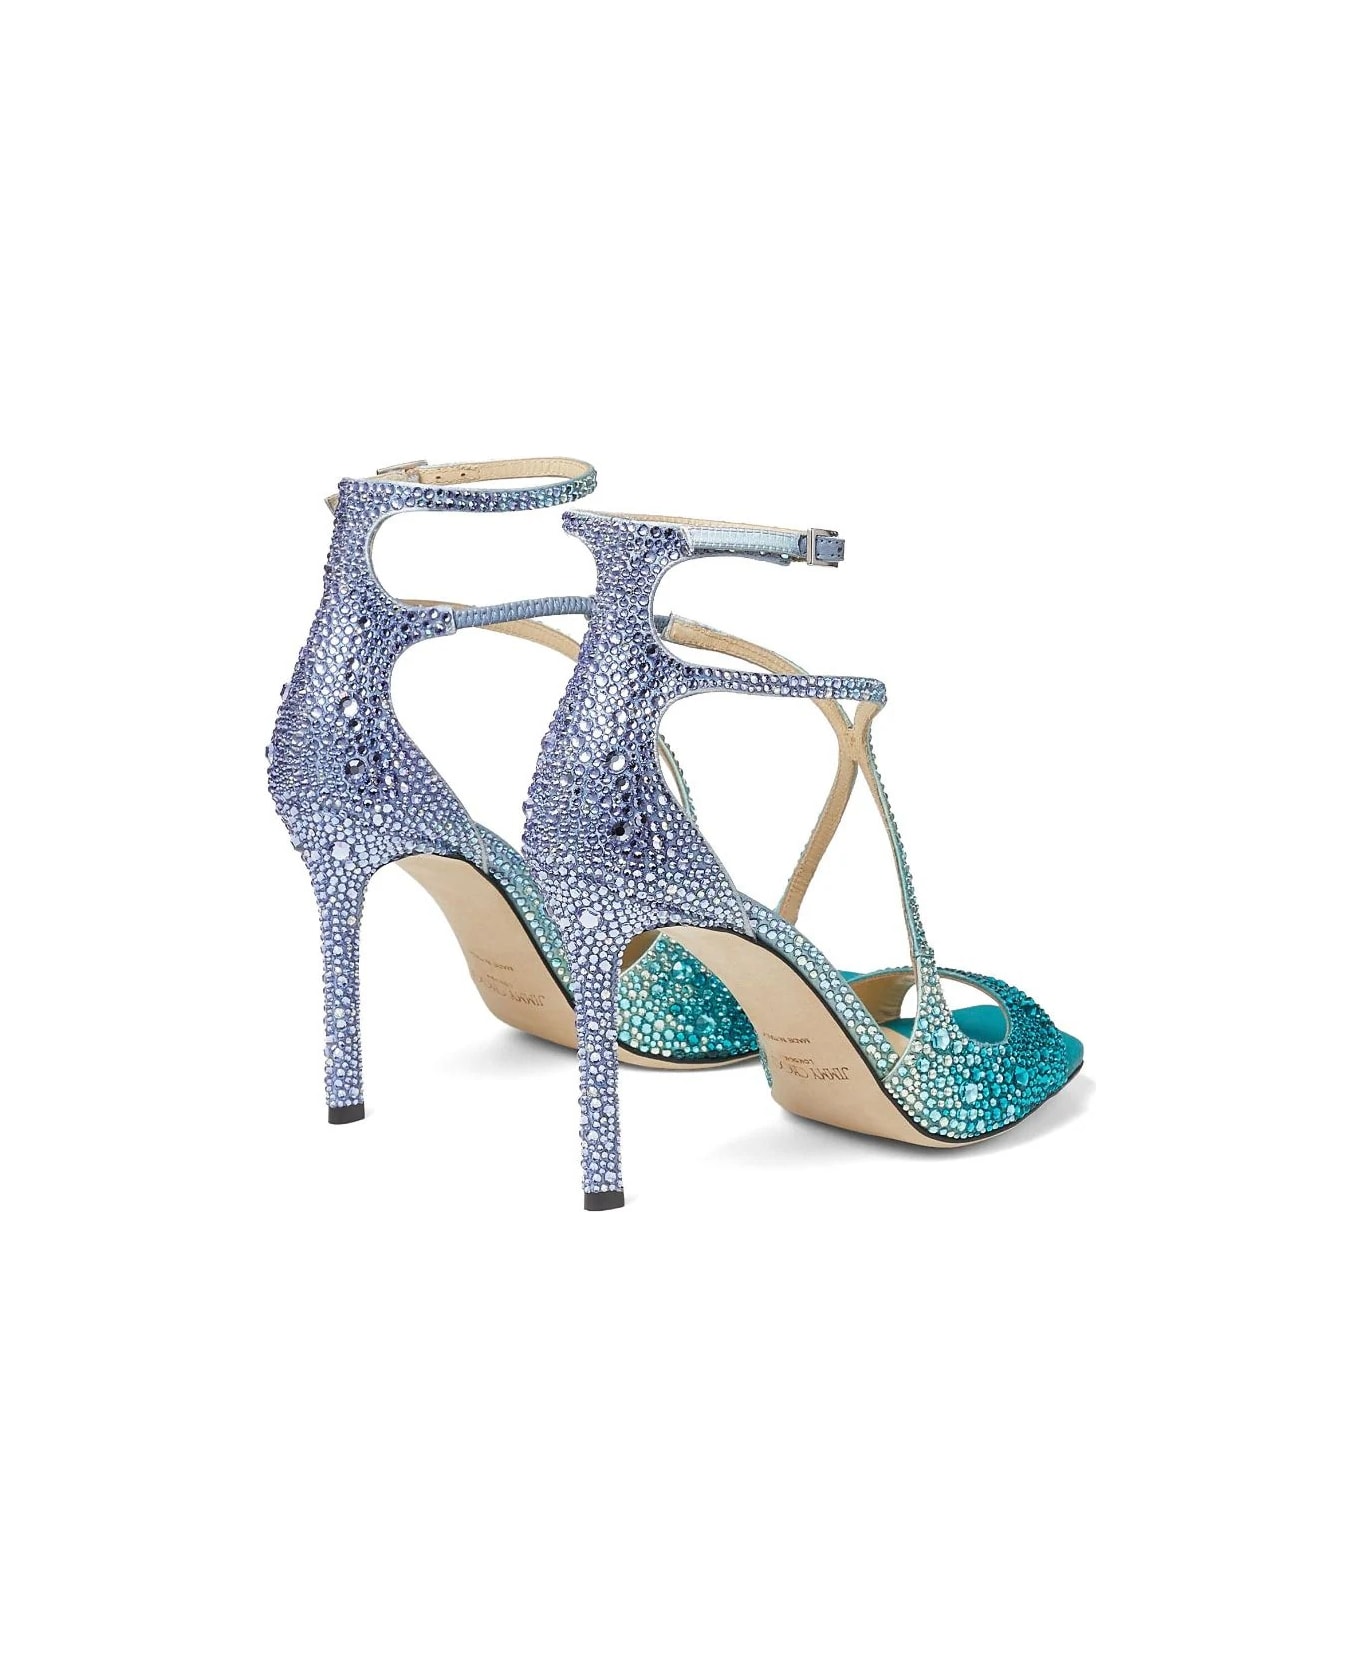 Jimmy Choo Azia 95 Sandal In Blue Peacock With Crystals - Blue サンダル